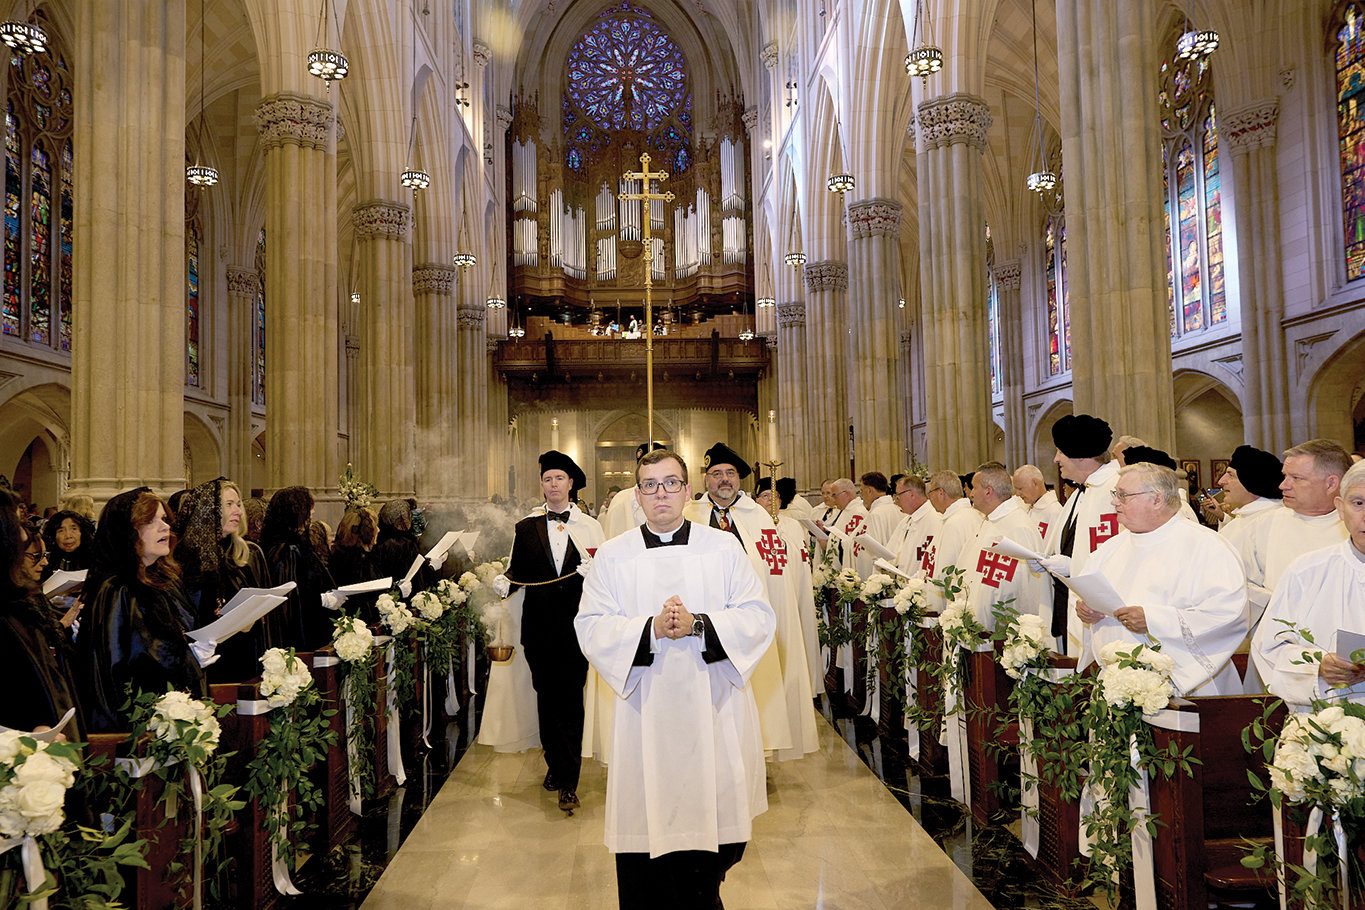 Dames and knights sing as they view the procession opening the Investiture Mass for the Order of the Holy Sepulchre at St. Patrick's Cathedral Oct. 15.